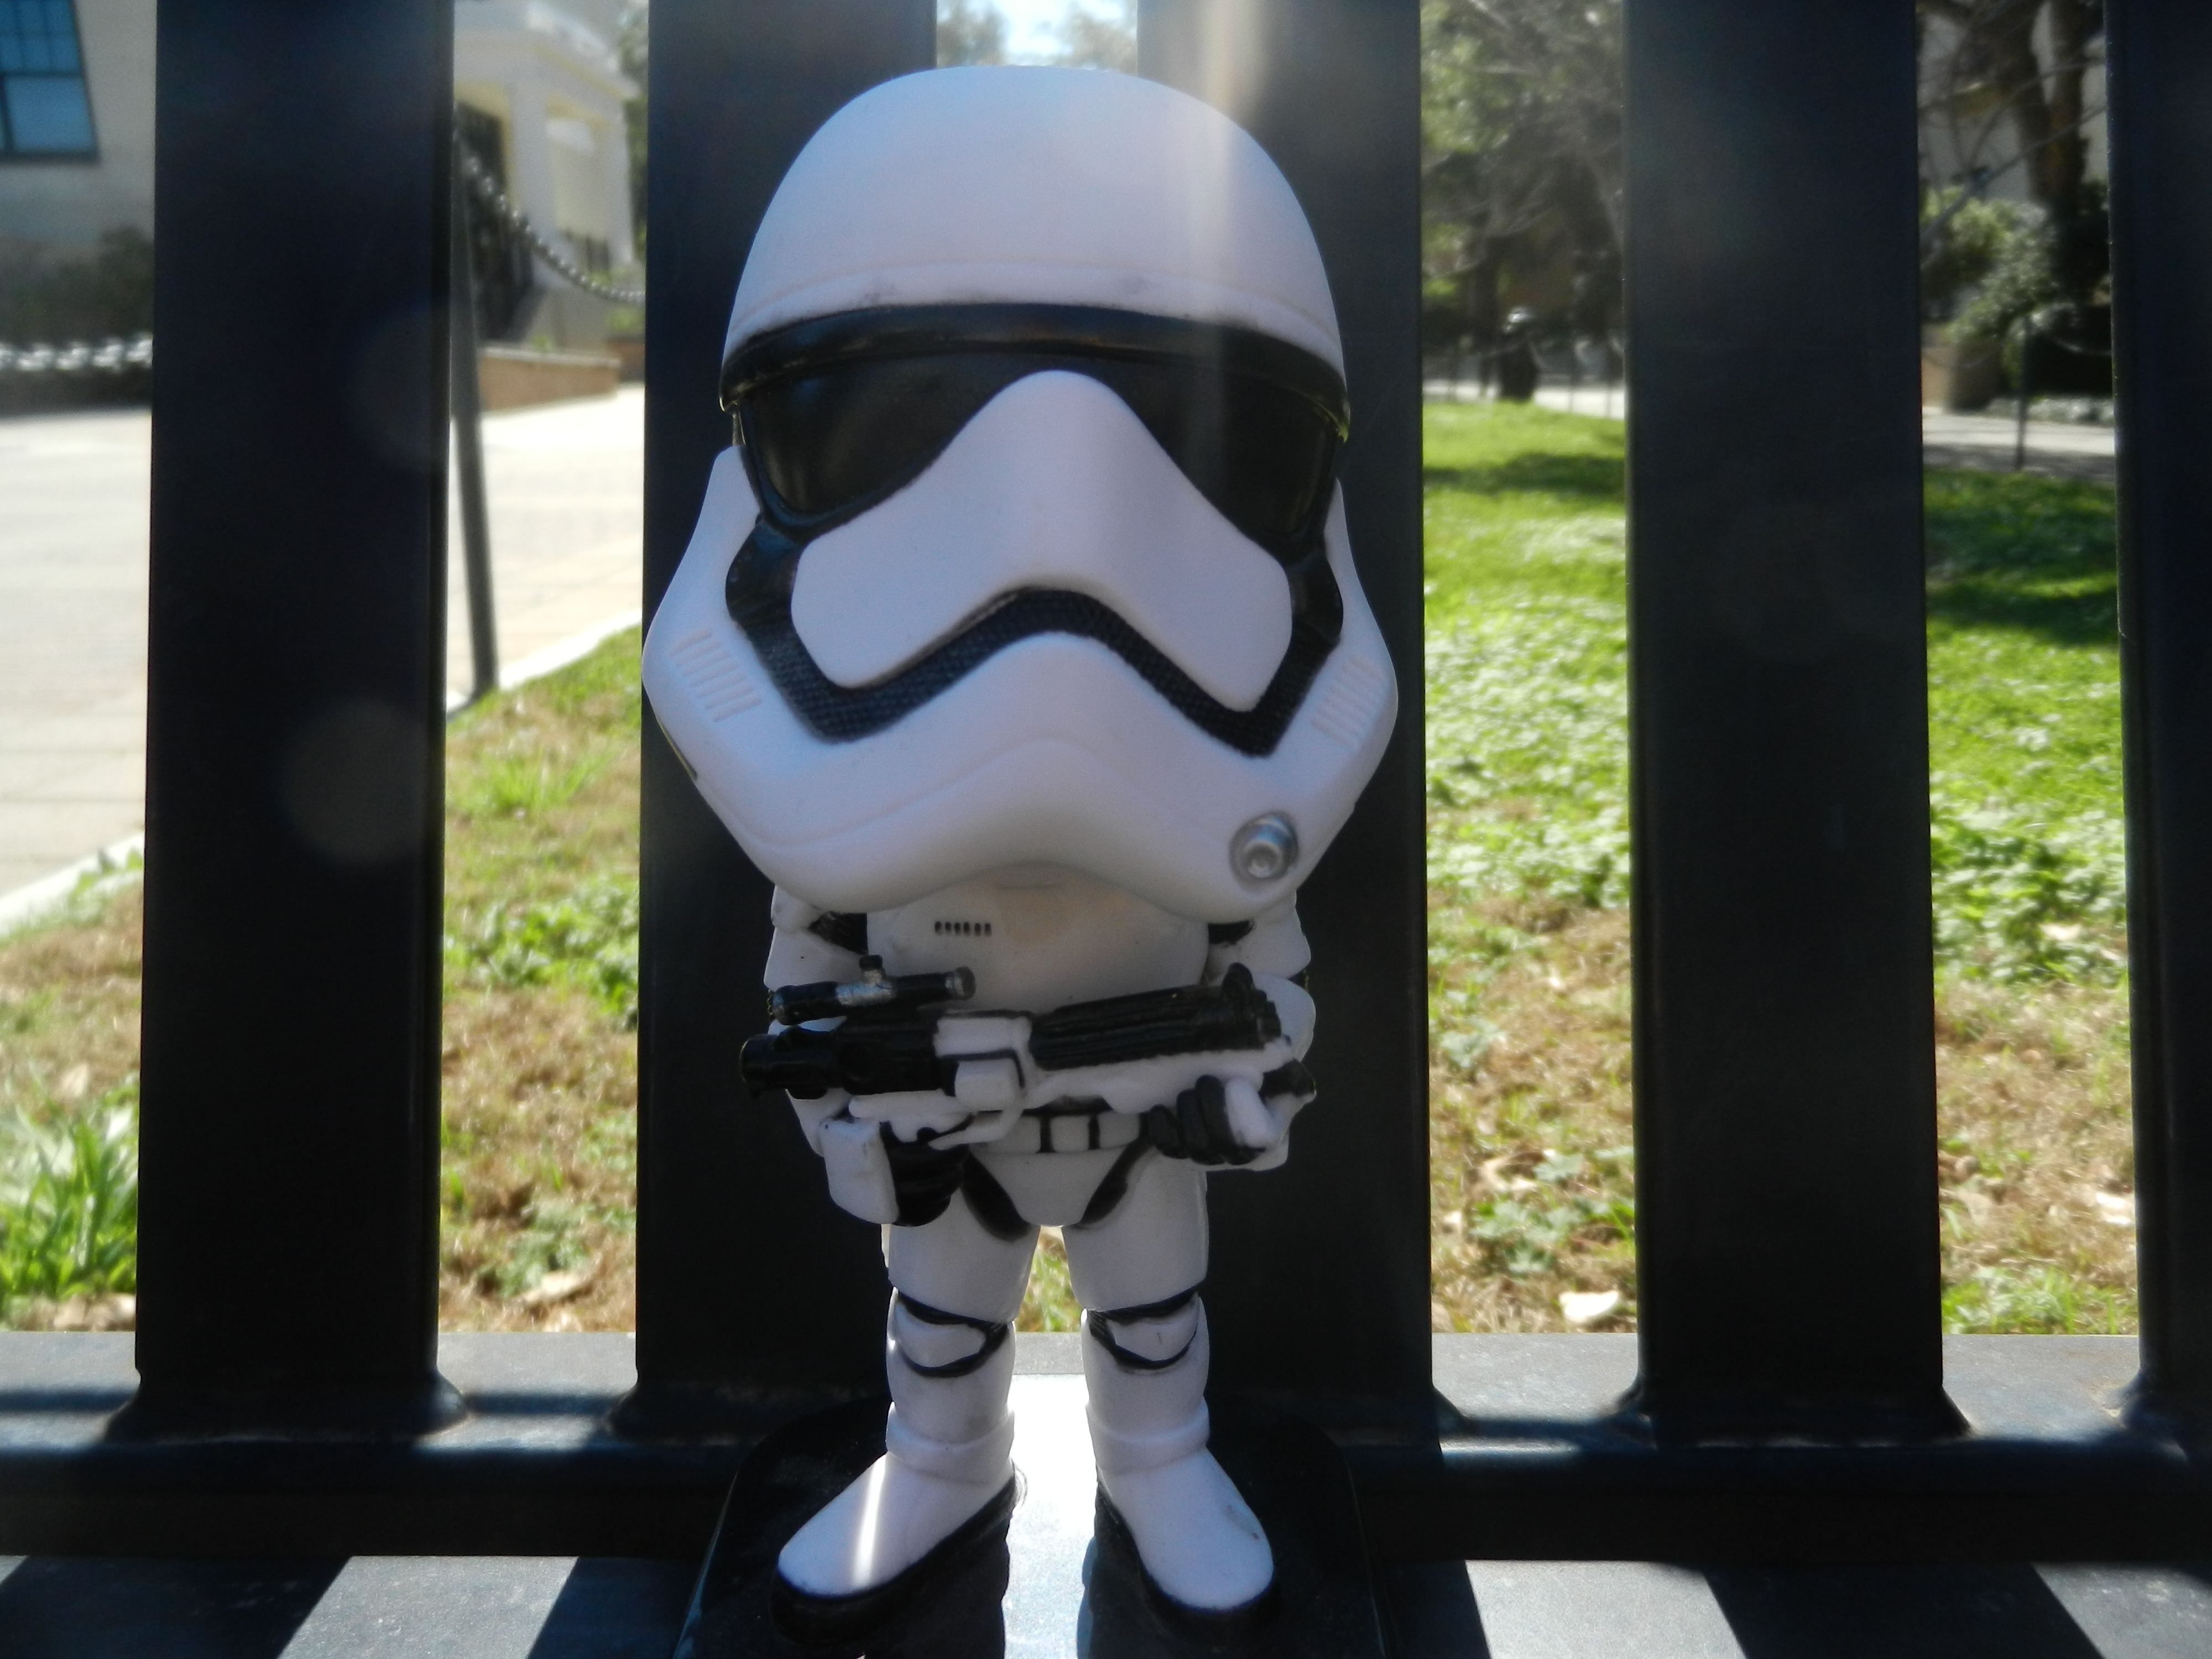 A bobble head of a Stormtrooper leans against the bench.